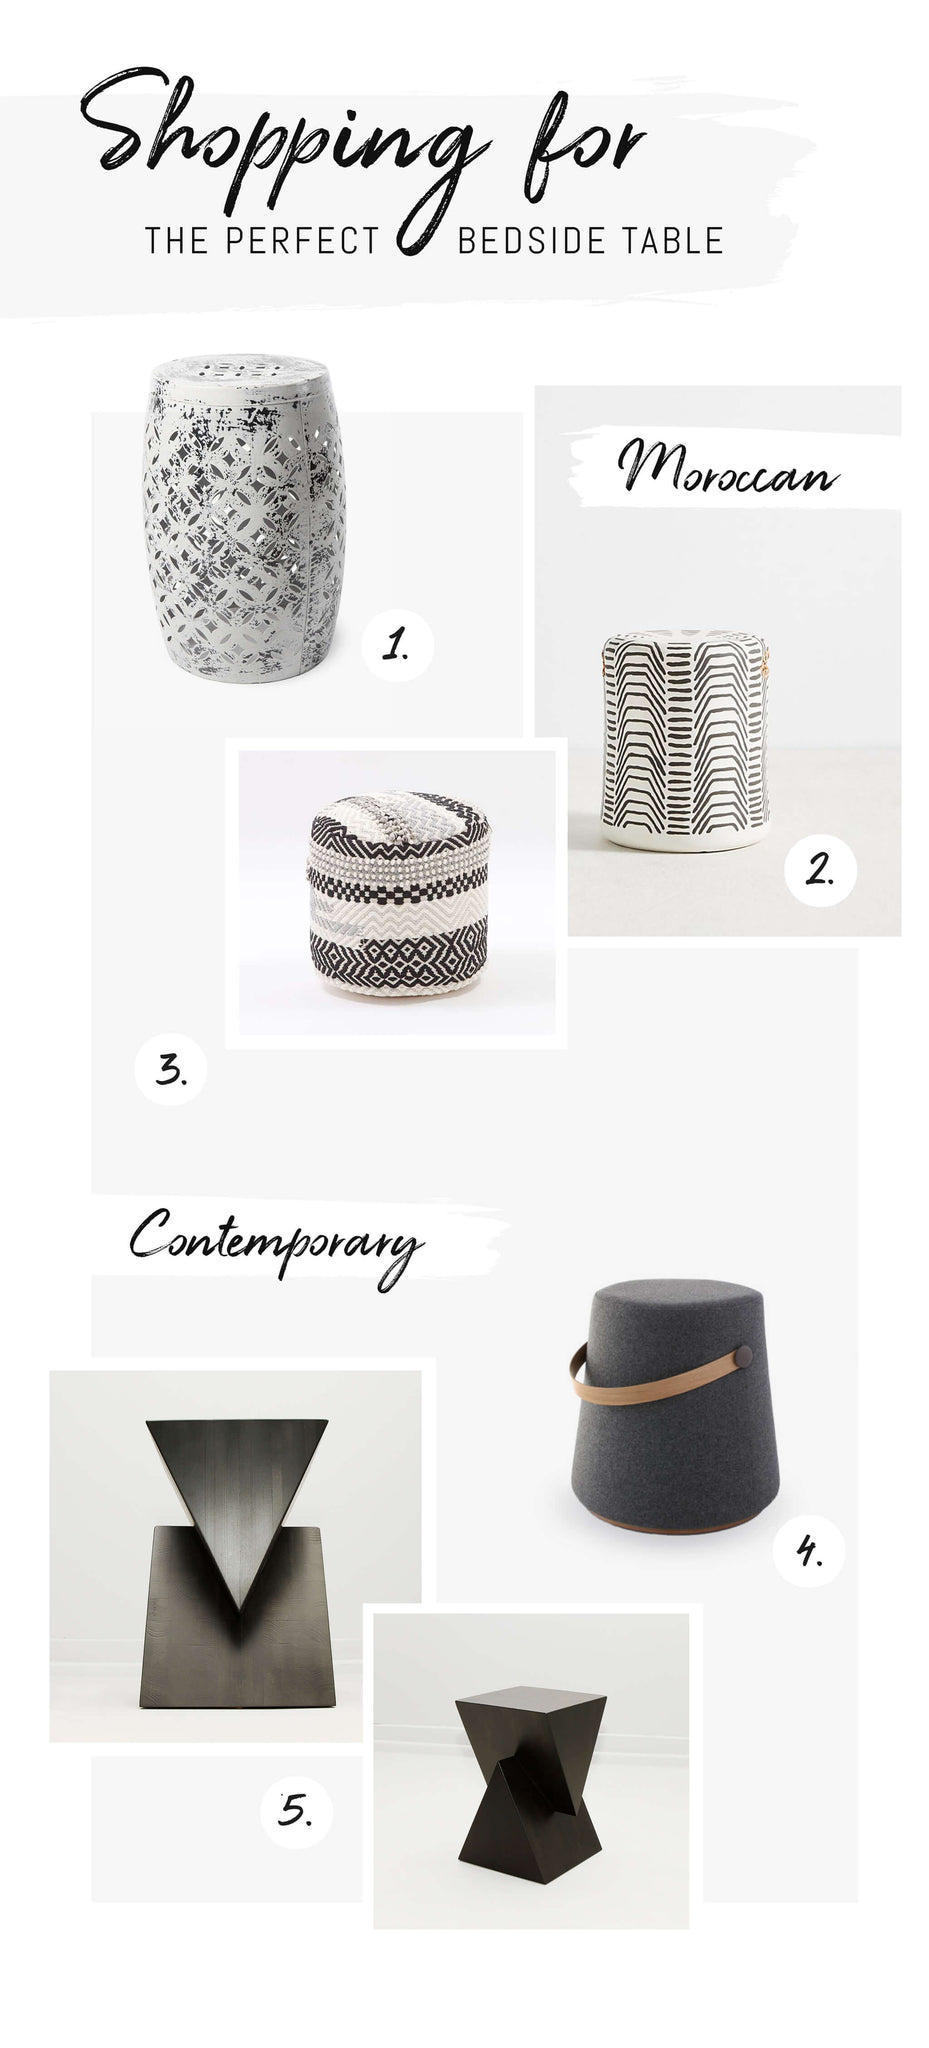 Shopping for the perfect modern boho nightstand - one room challenge 2019, week 2.